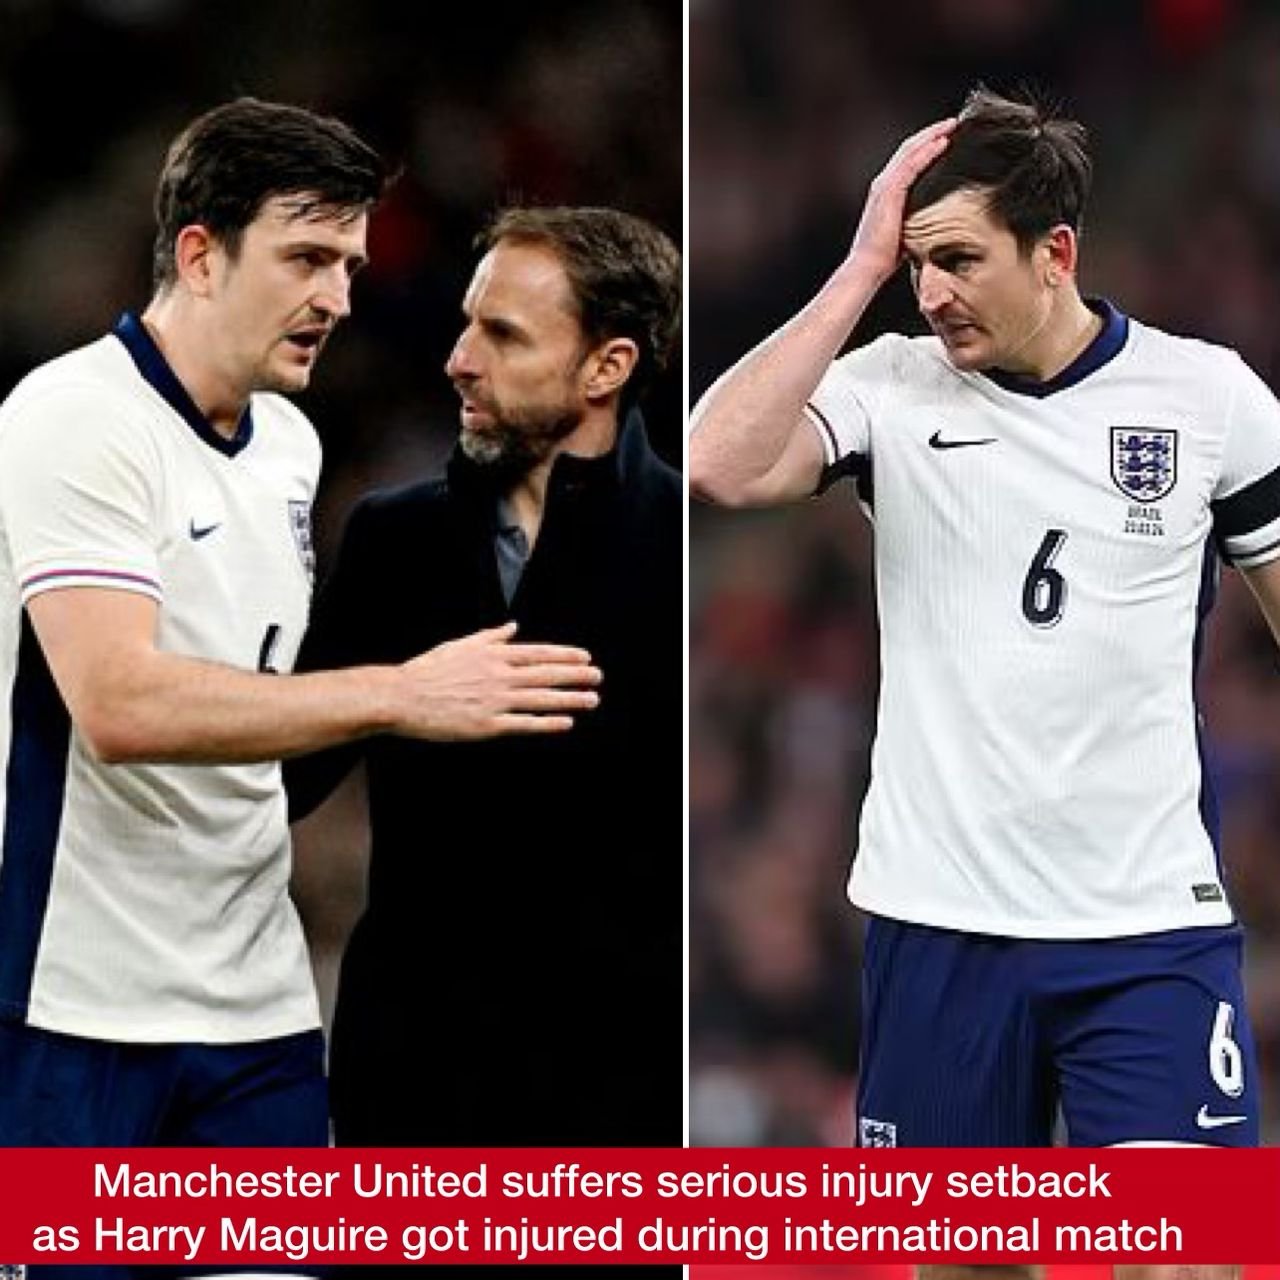 Manchester United suffers serious injury setback as Harry Maguire got injured during international match